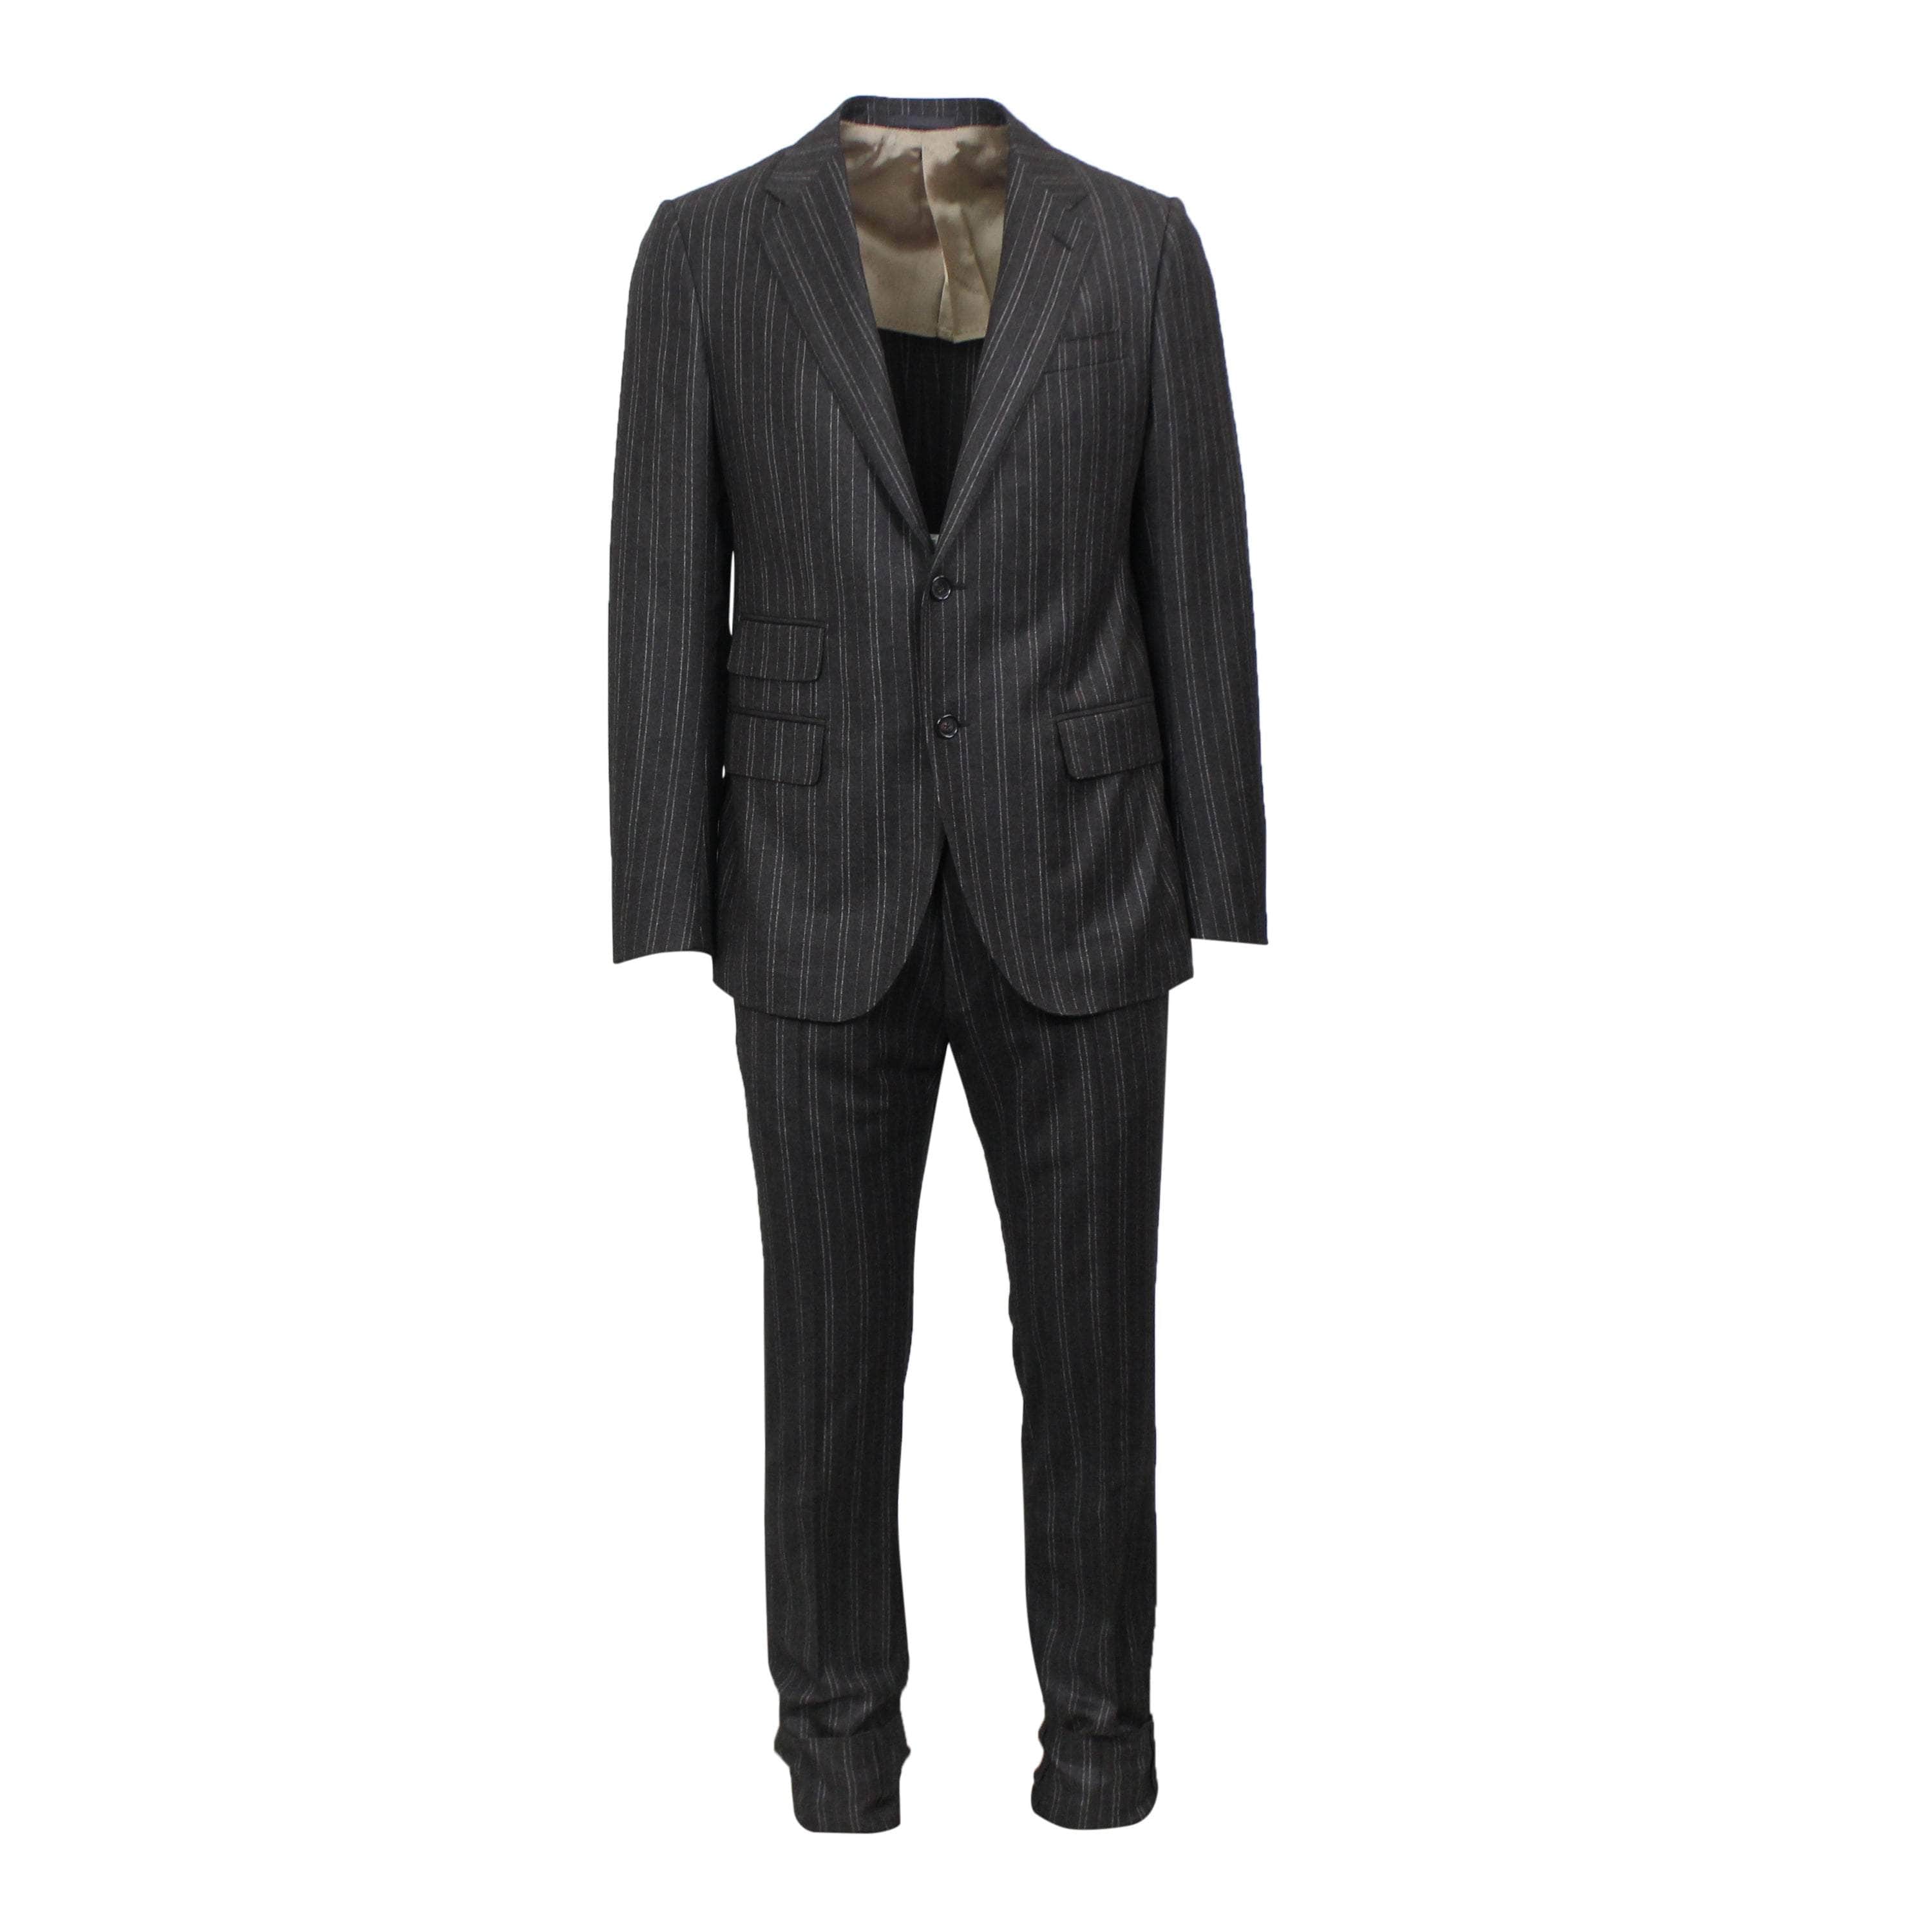 Caruso 500-750, caruso, channelenable-all, chicmi, couponcollection, main-clothing, shop375, size-50, Stadium Goods, stadiumgoods 50 Dark Brown Wool Blend Single Breasted Suit 8R CRS-XTPS-0118/50 CRS-XTPS-0118/50